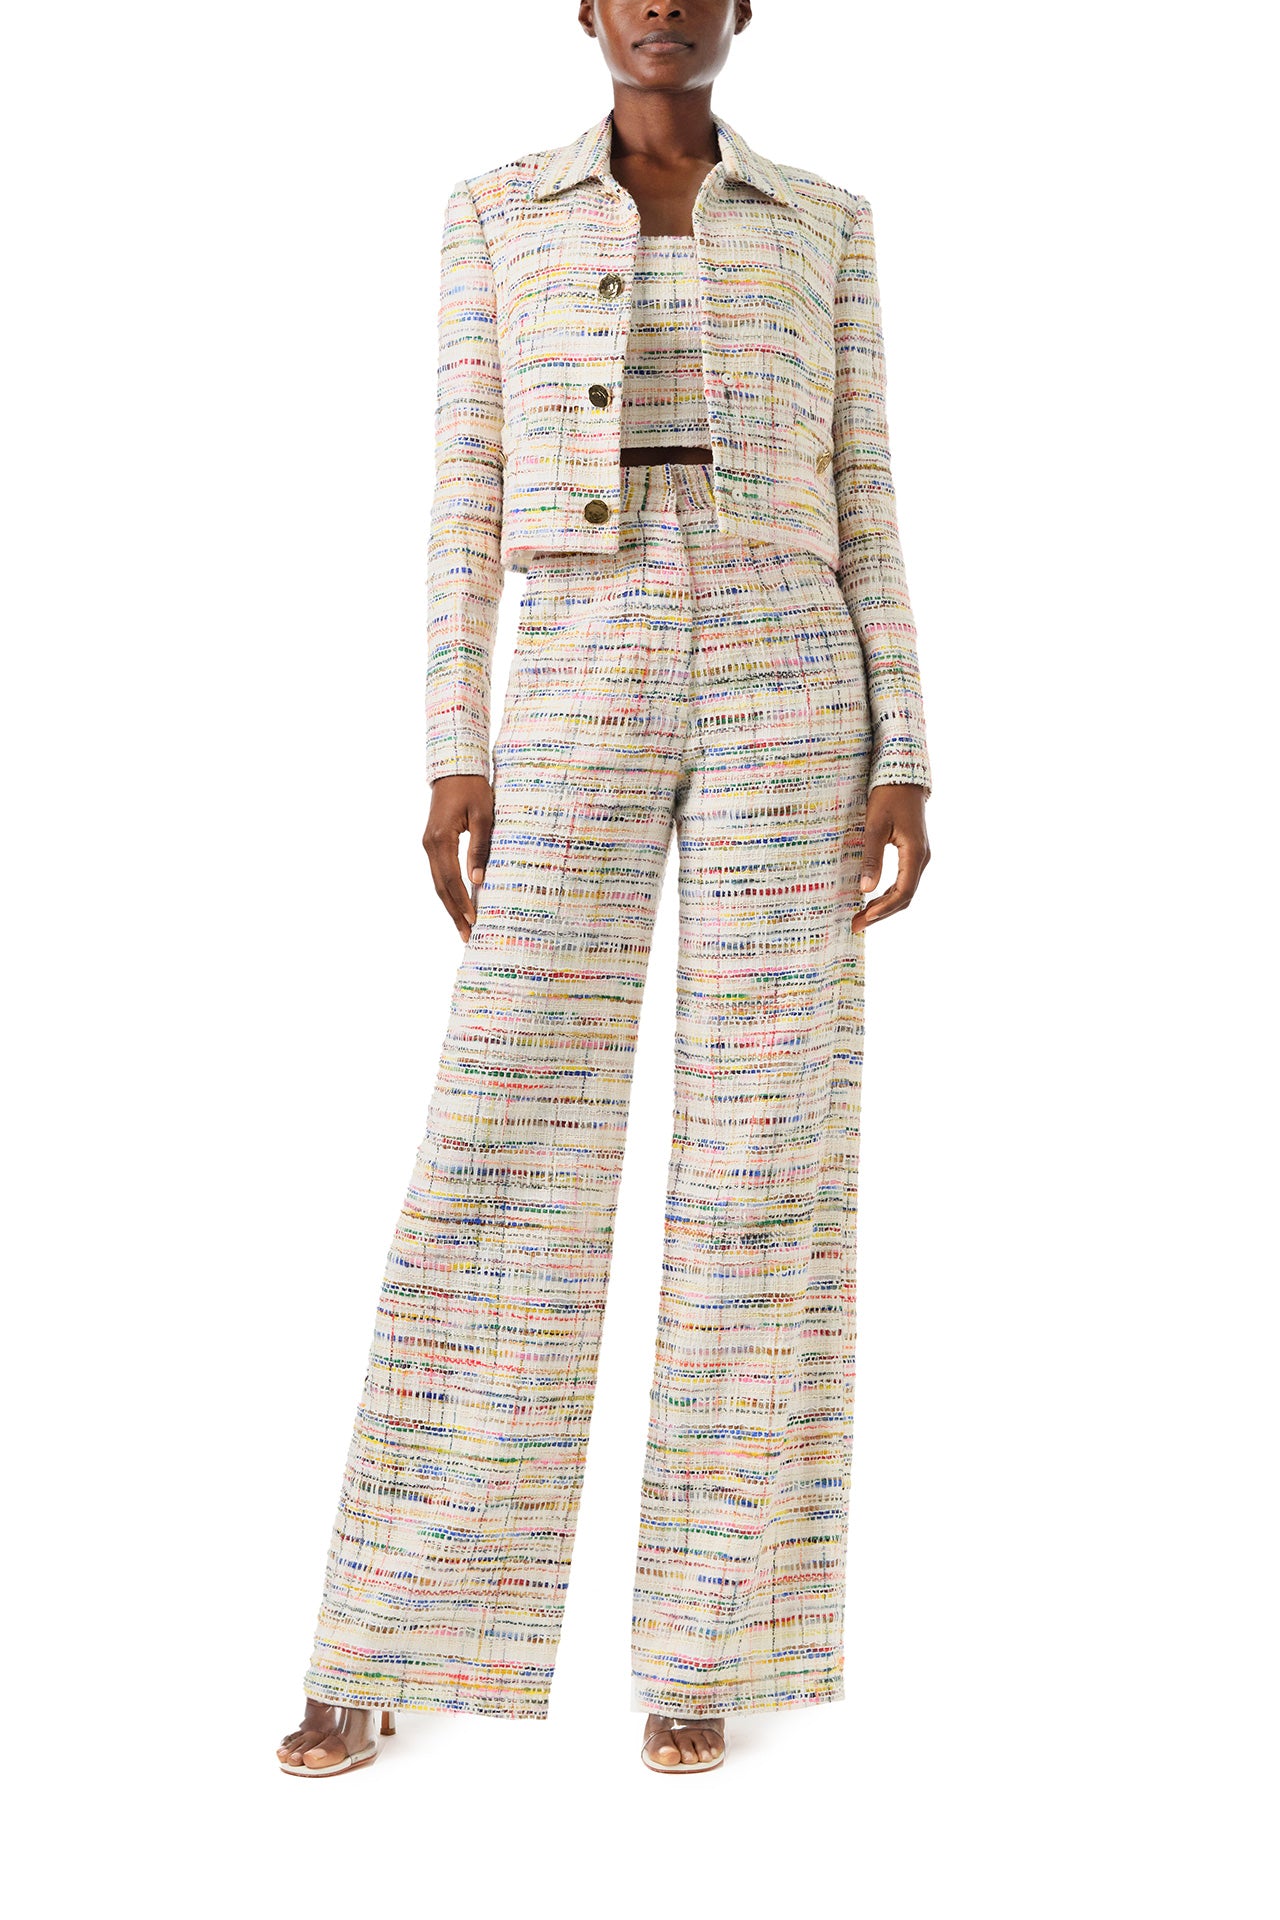 Monique Lhuillier Spring 2024 high waisted trouser with pockets in multi color tweed - front.